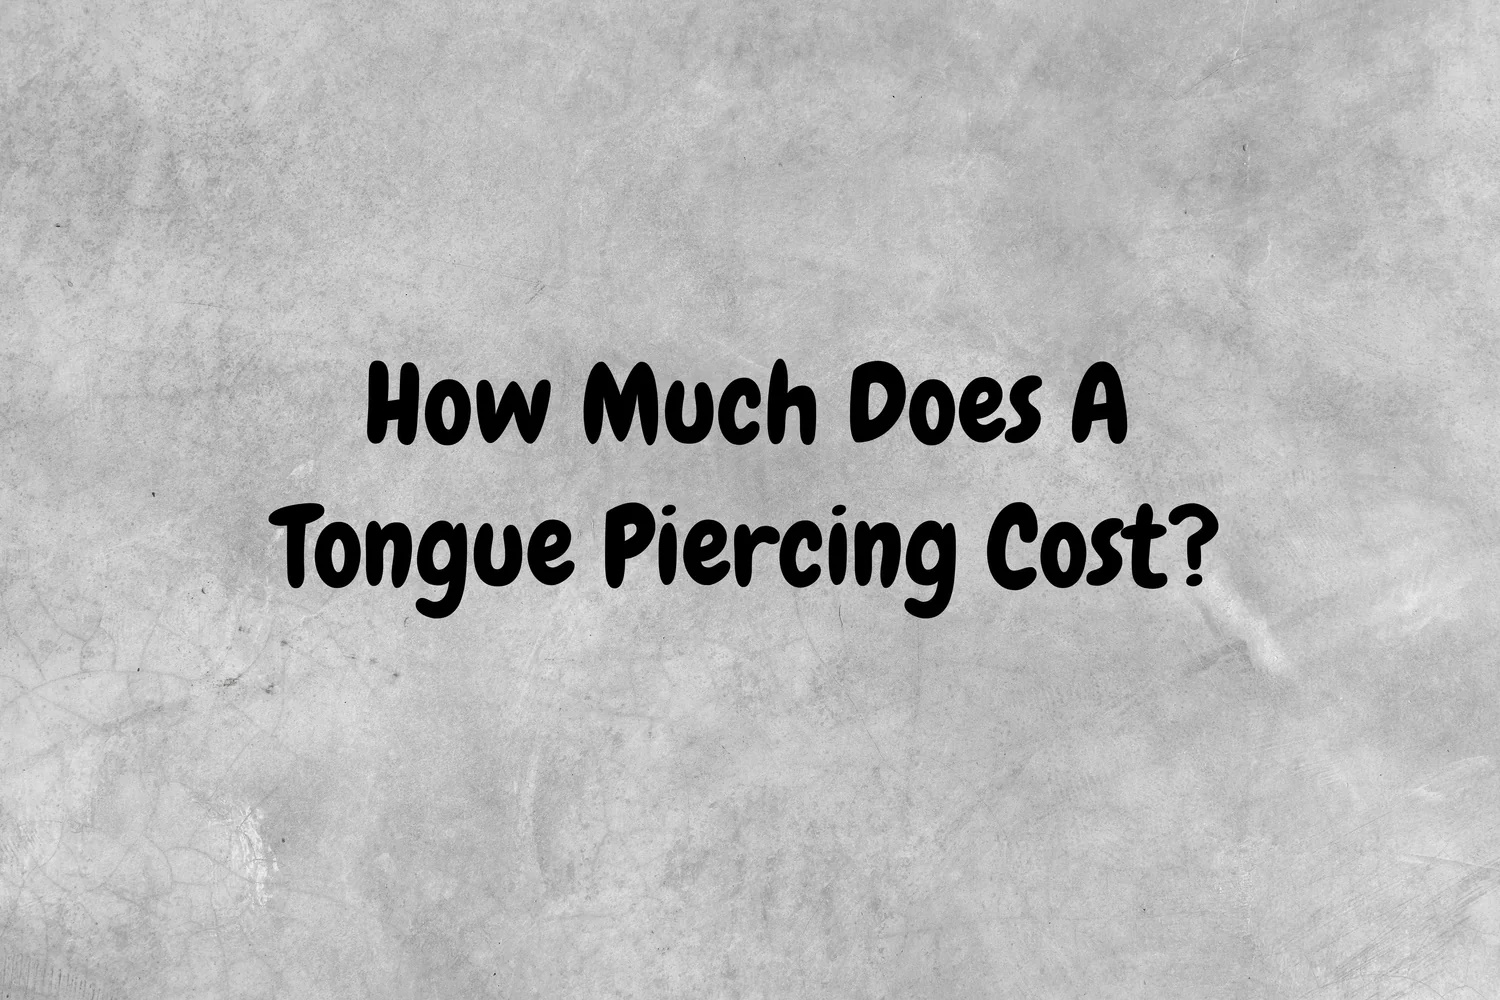 An image with a gray background and black text asking the question, "How much does a tongue piercing cost?"